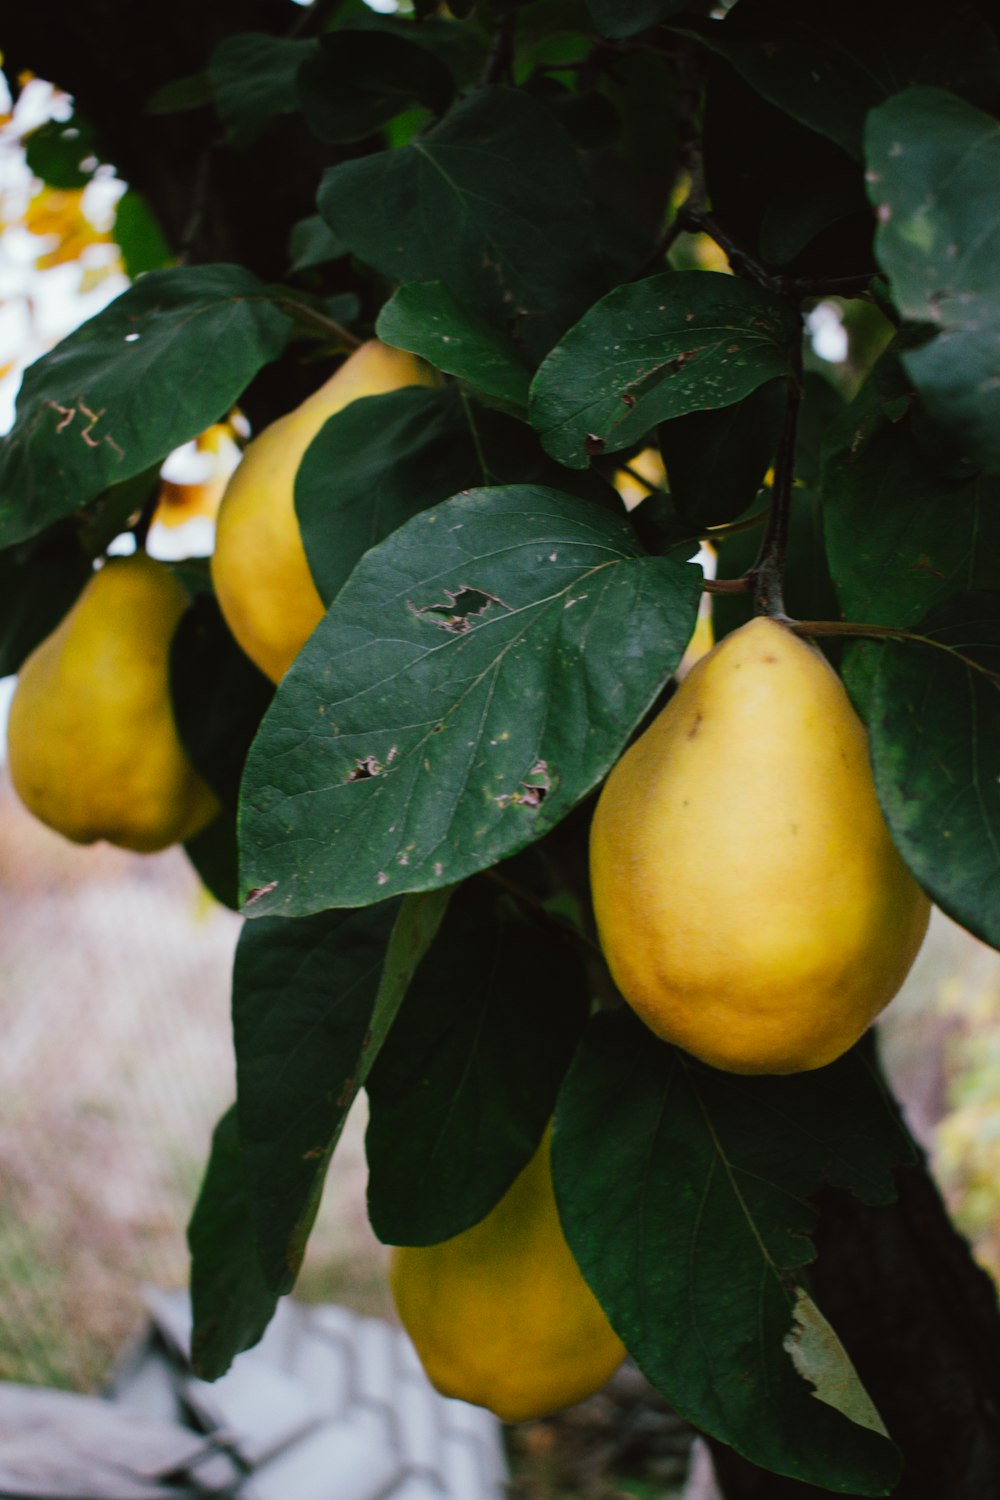 yellow round fruit on green leaves